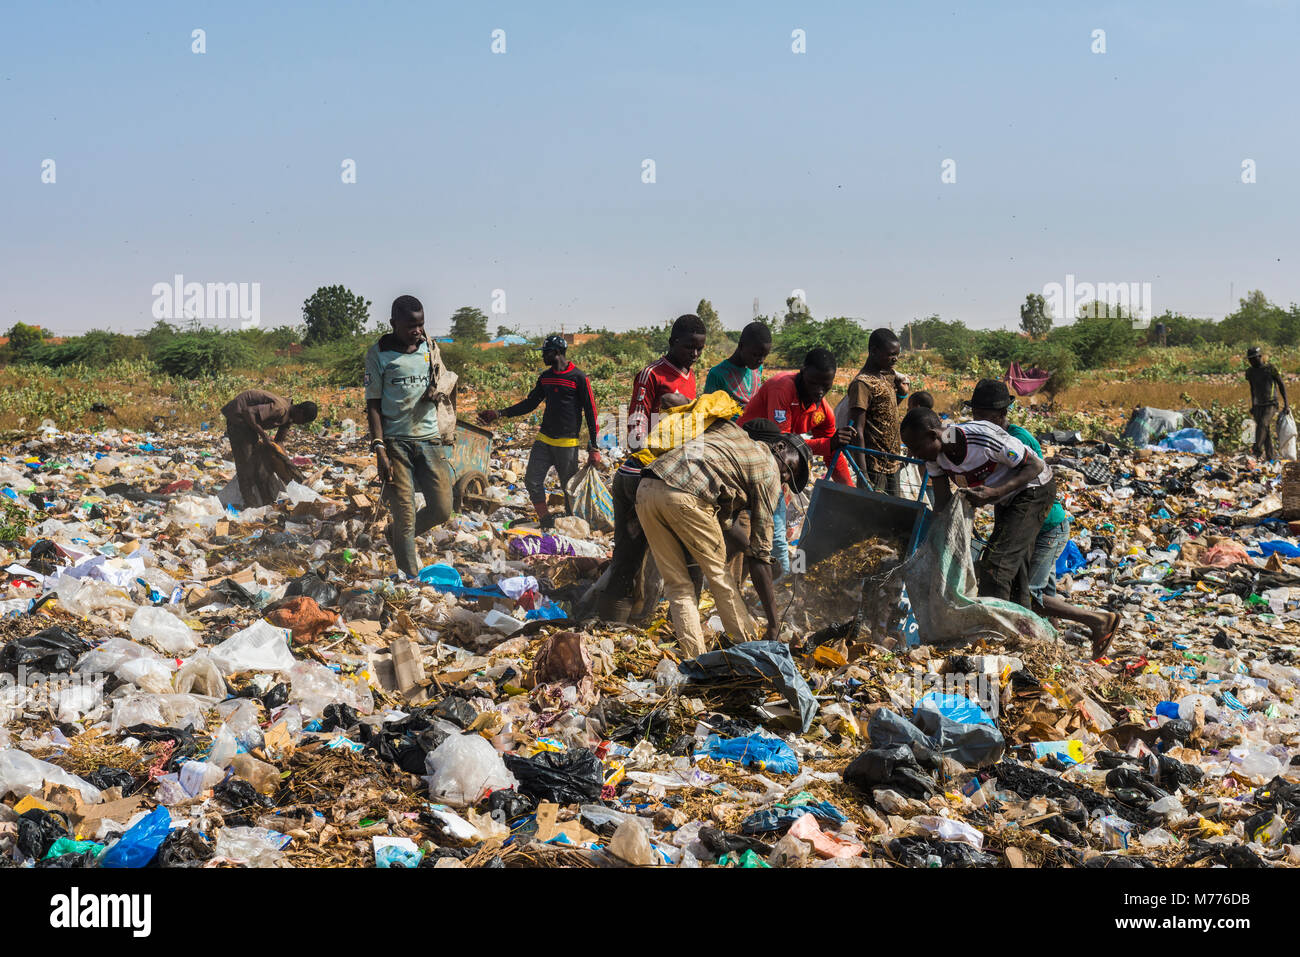 Local boys looking for valuables in the public rubbish dump, Niamey, Niger, Africa Stock Photo